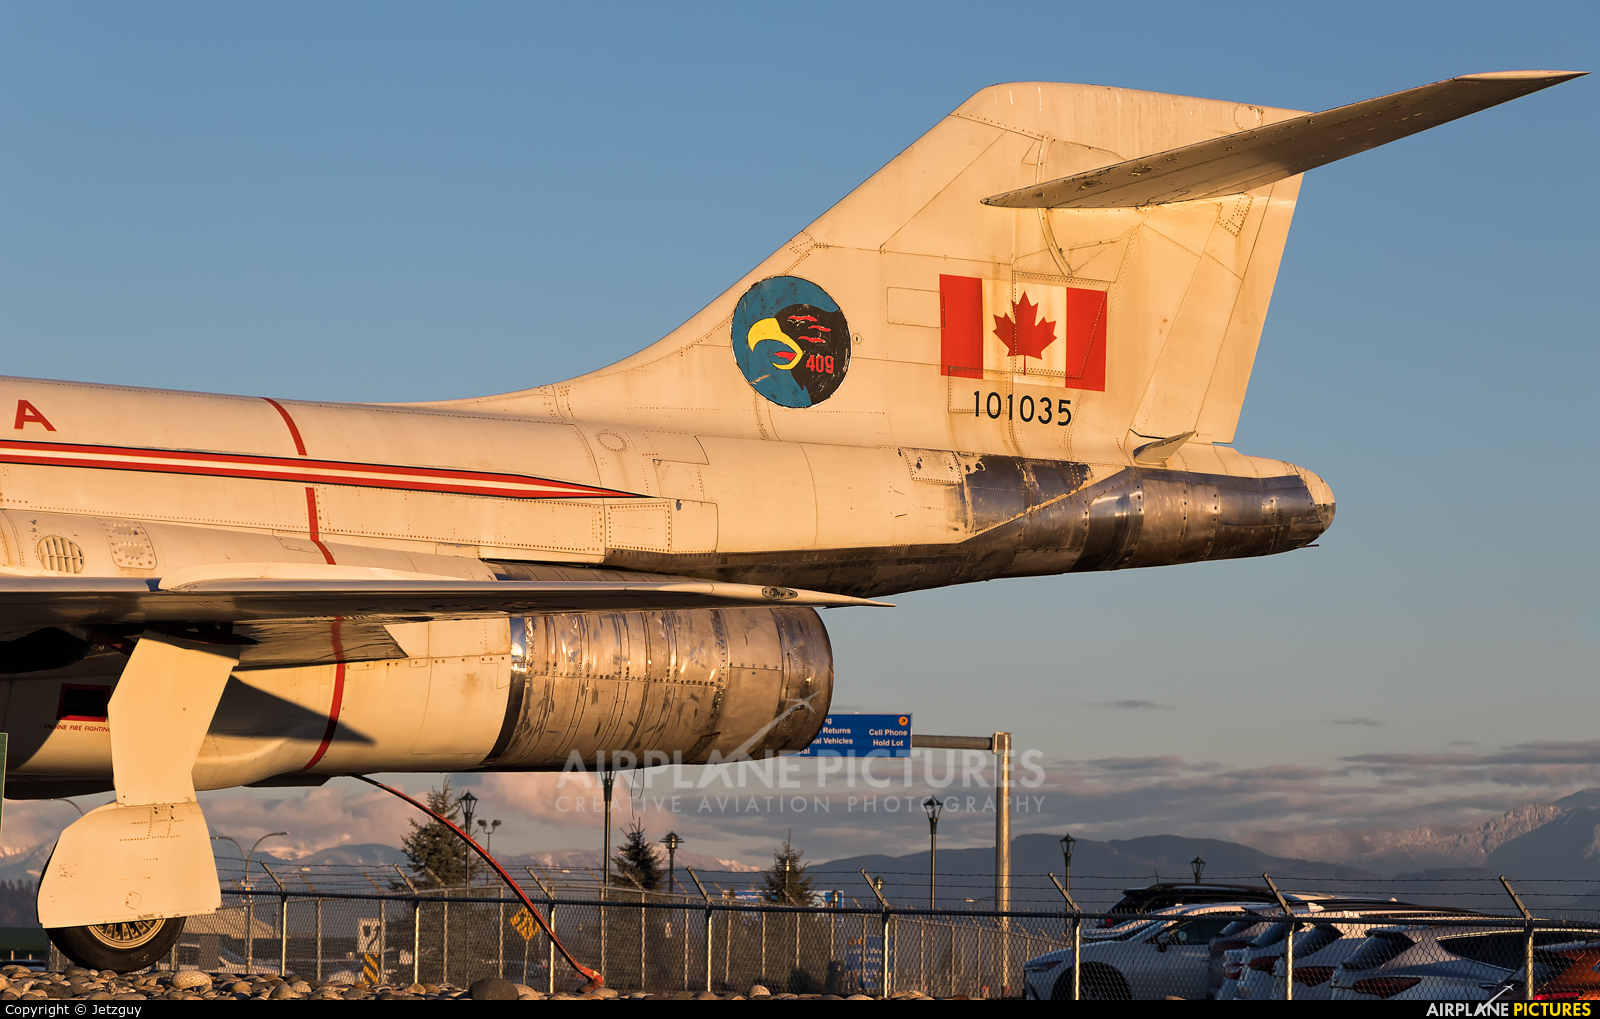 101035 - Canada - Air Force McDonnell CF-101 Voodoo (all models) at ...